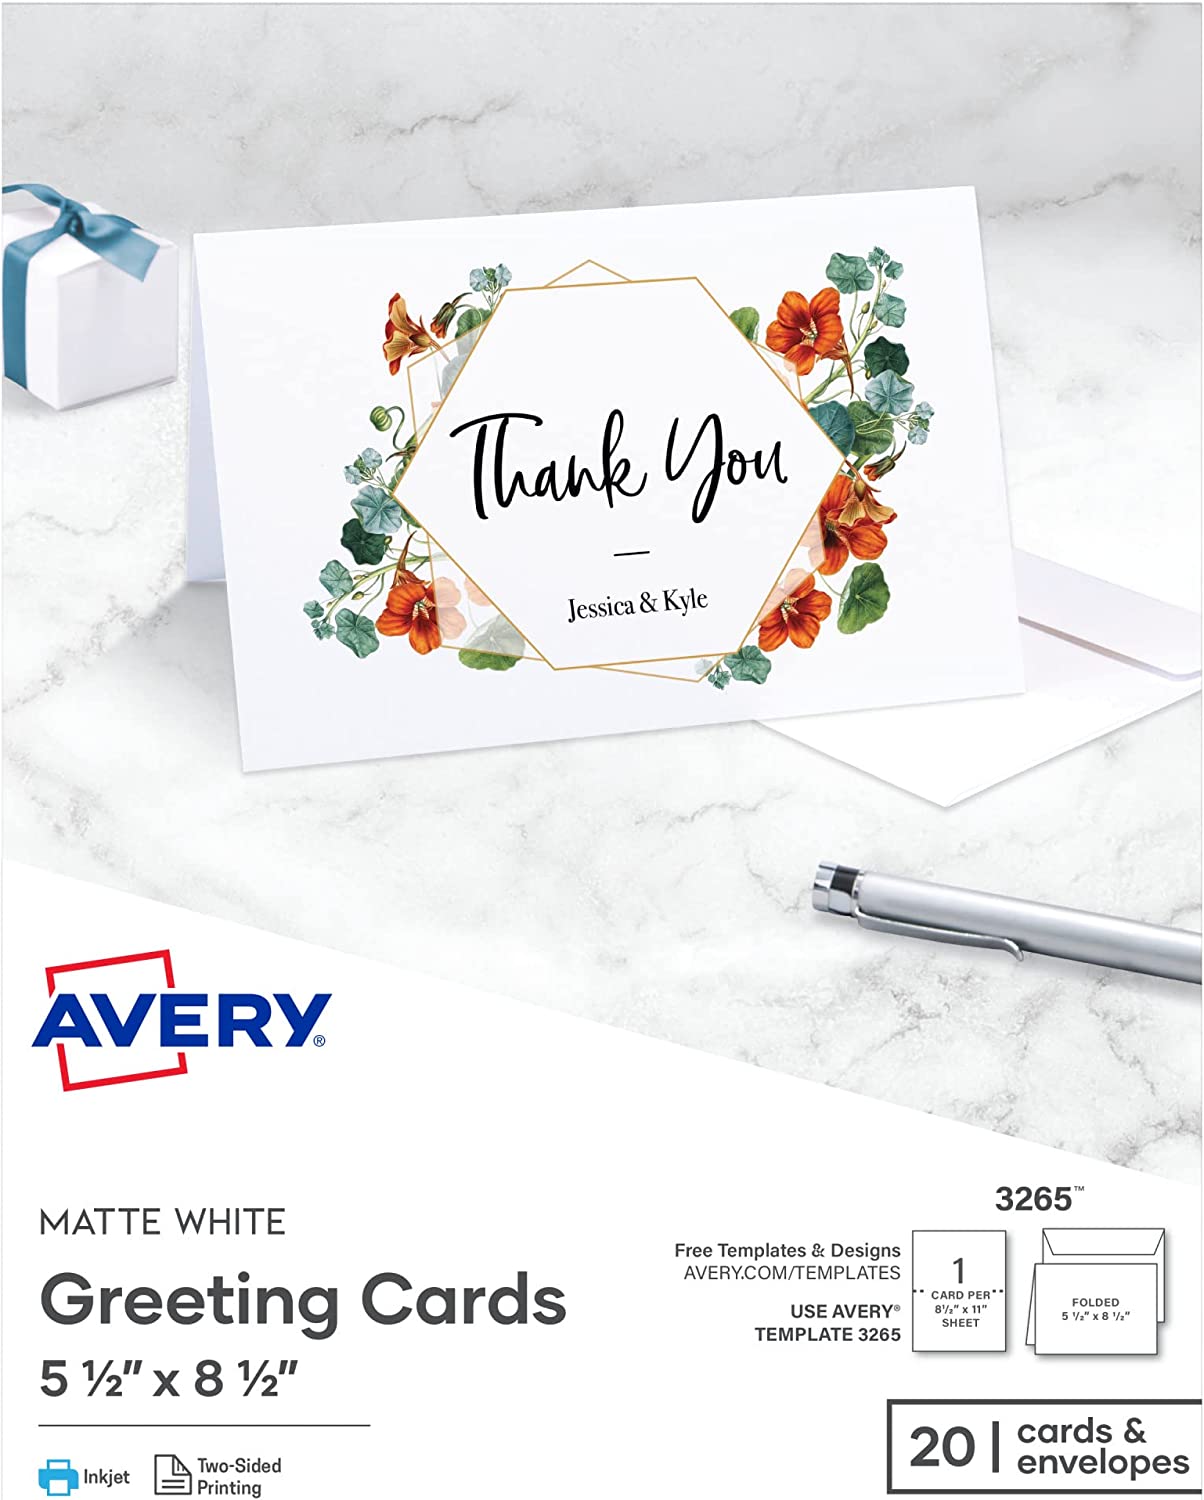 Avery Printable Greeting Cards Half-Fold 5.5" x 8.5" Matte White 20 Blank Cards with Envelopes (3265)